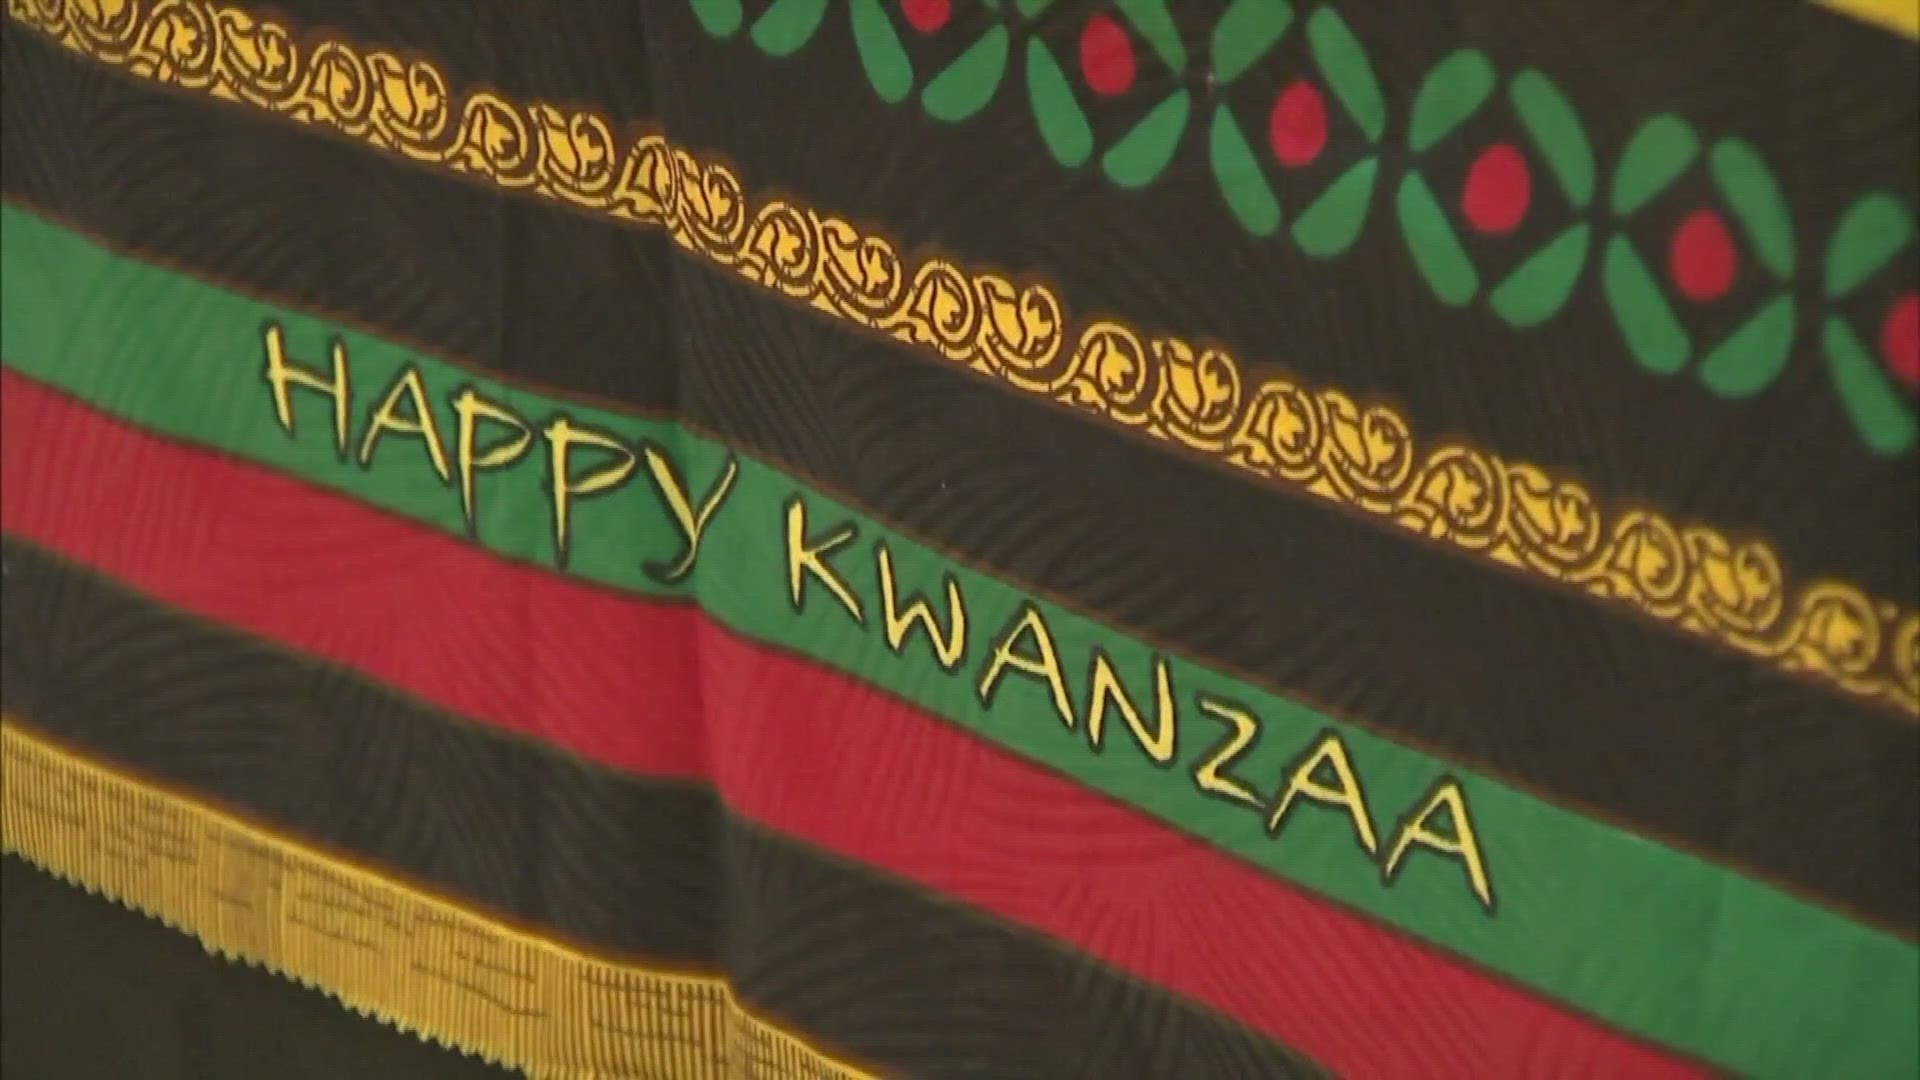 Tuesday is the first day of Kwanzaa.